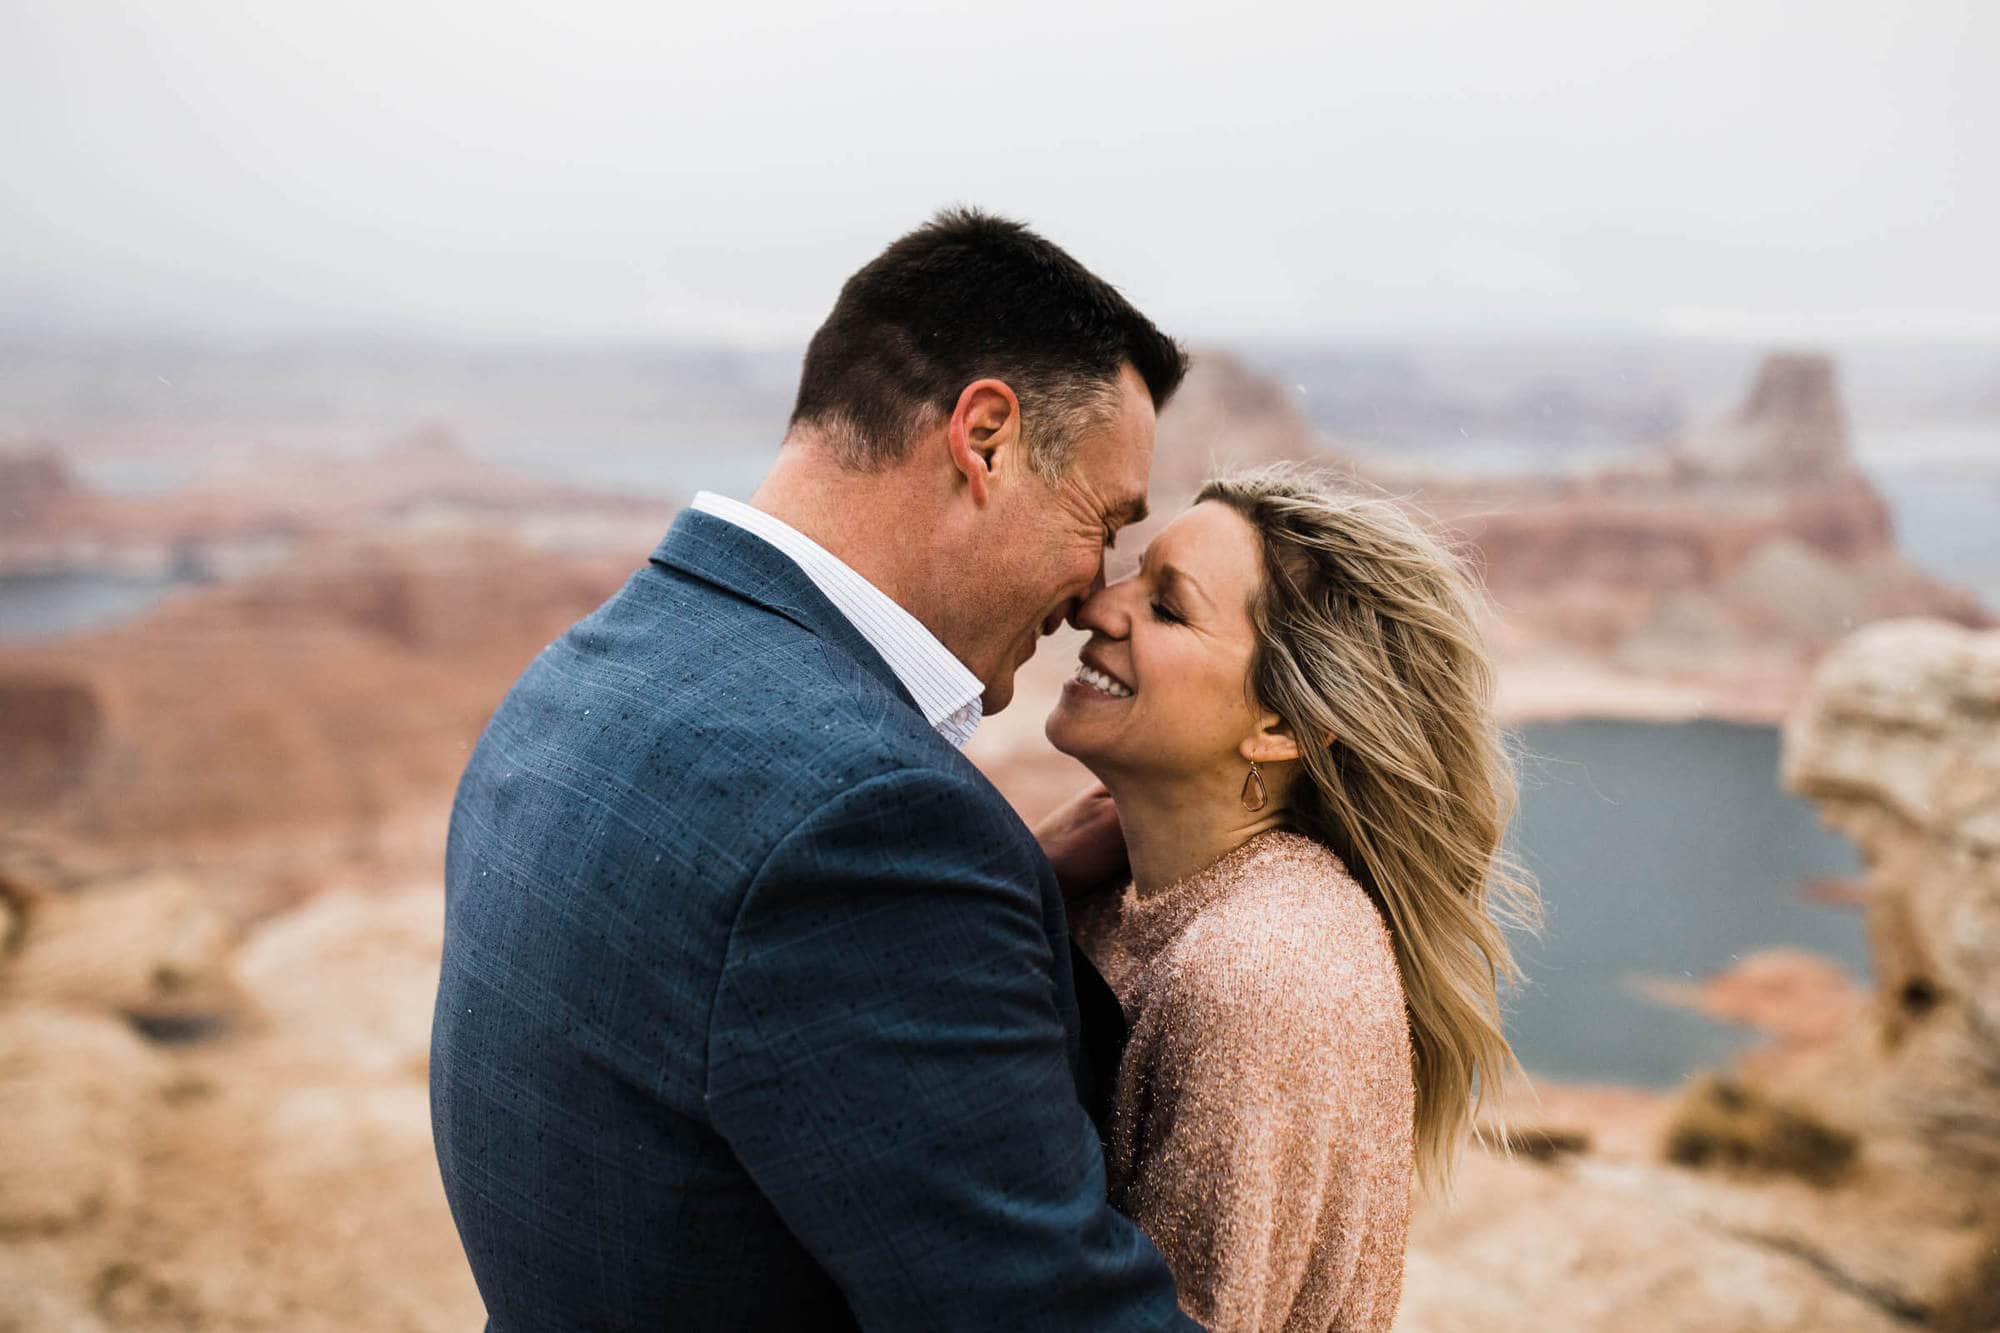 This 4x4 desert engagement session was one for the books. The desert was a stunning backdrop for unforgettable engagement photos you won't want to miss.